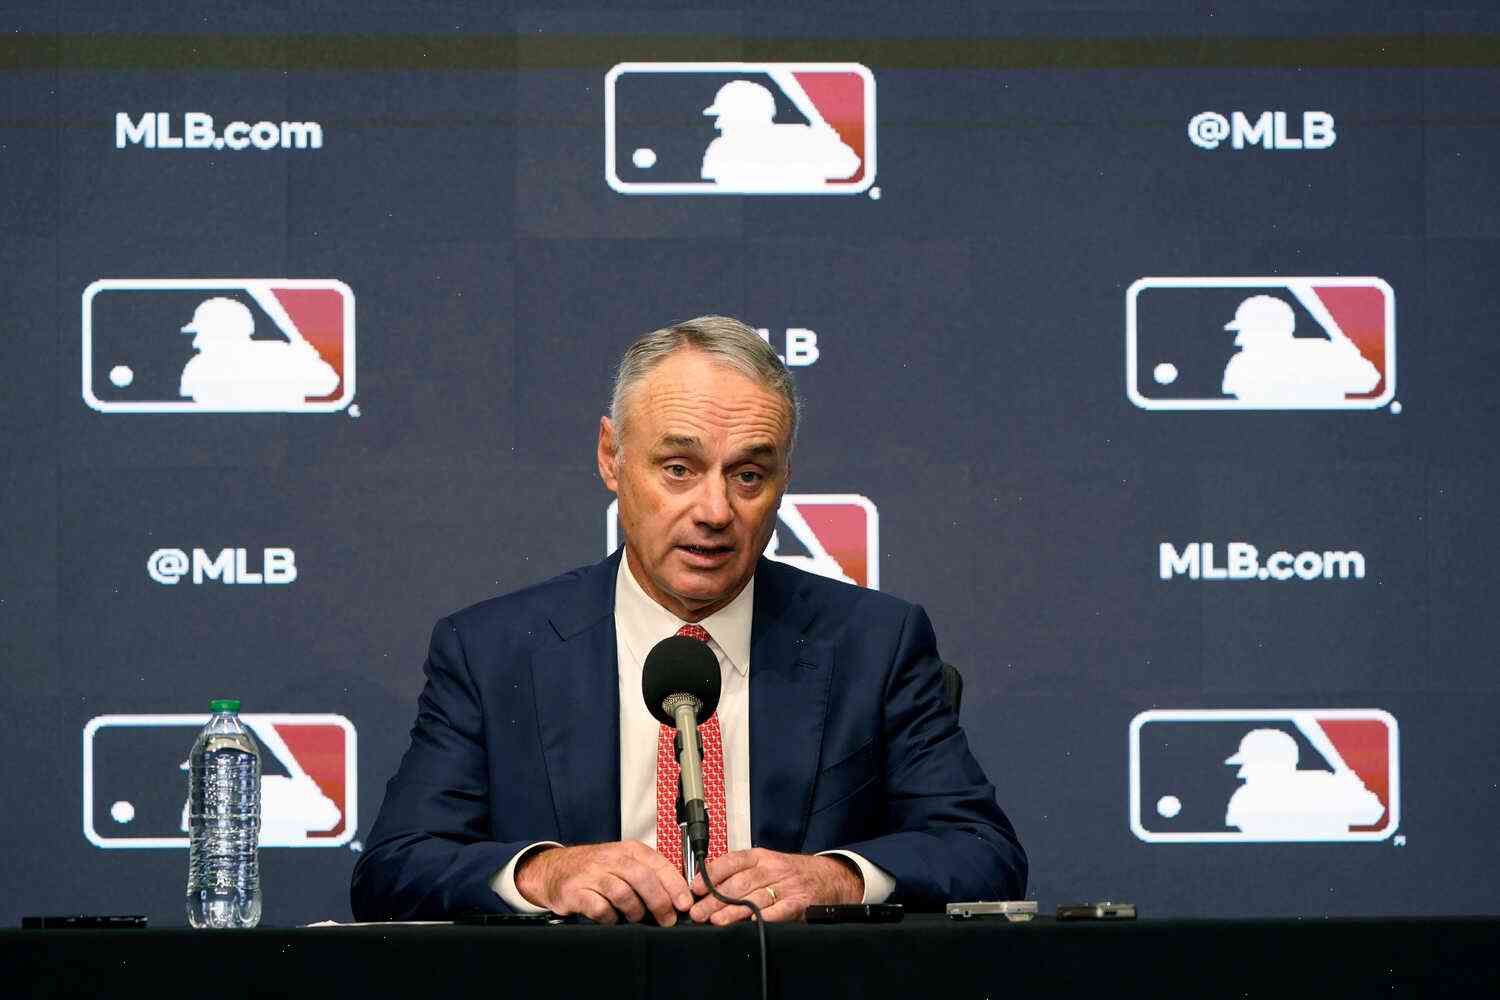 We have the situation covered, says executive director of the Major League Baseball Players Association